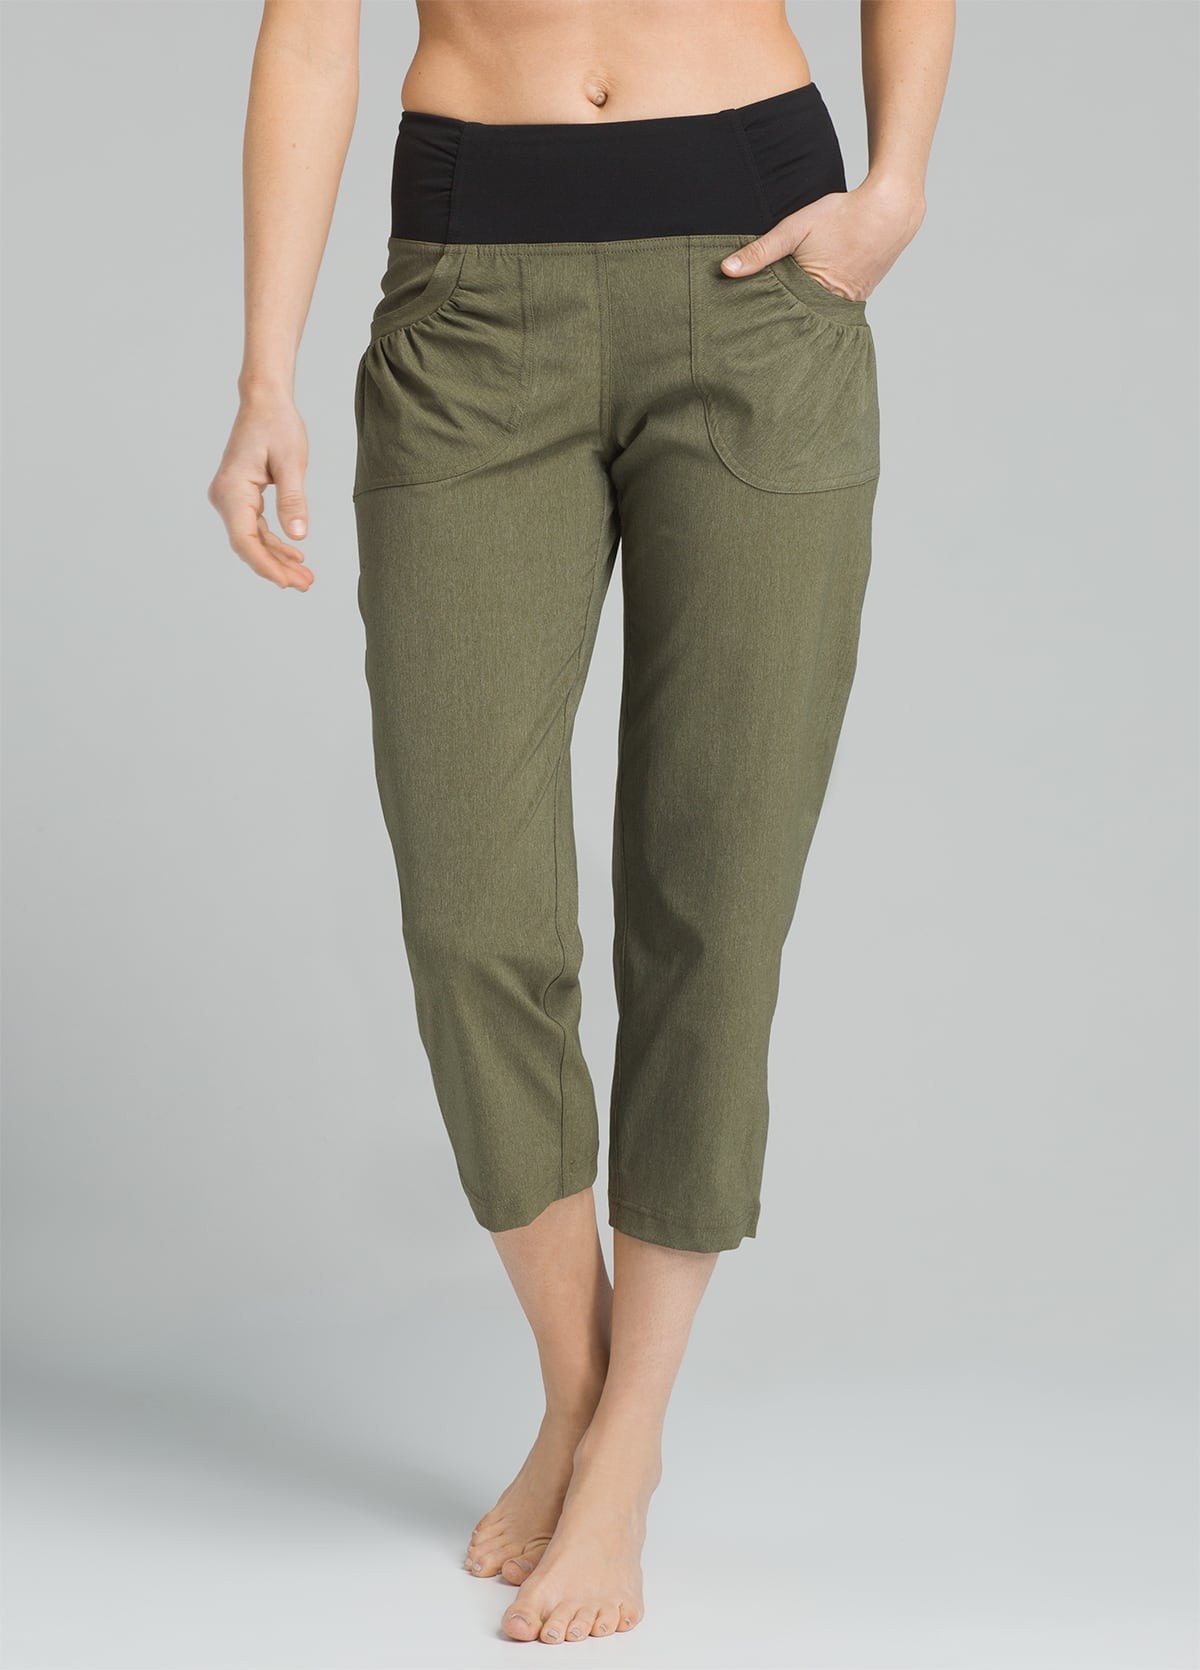 Capri pants – a lifestyle from the 50s